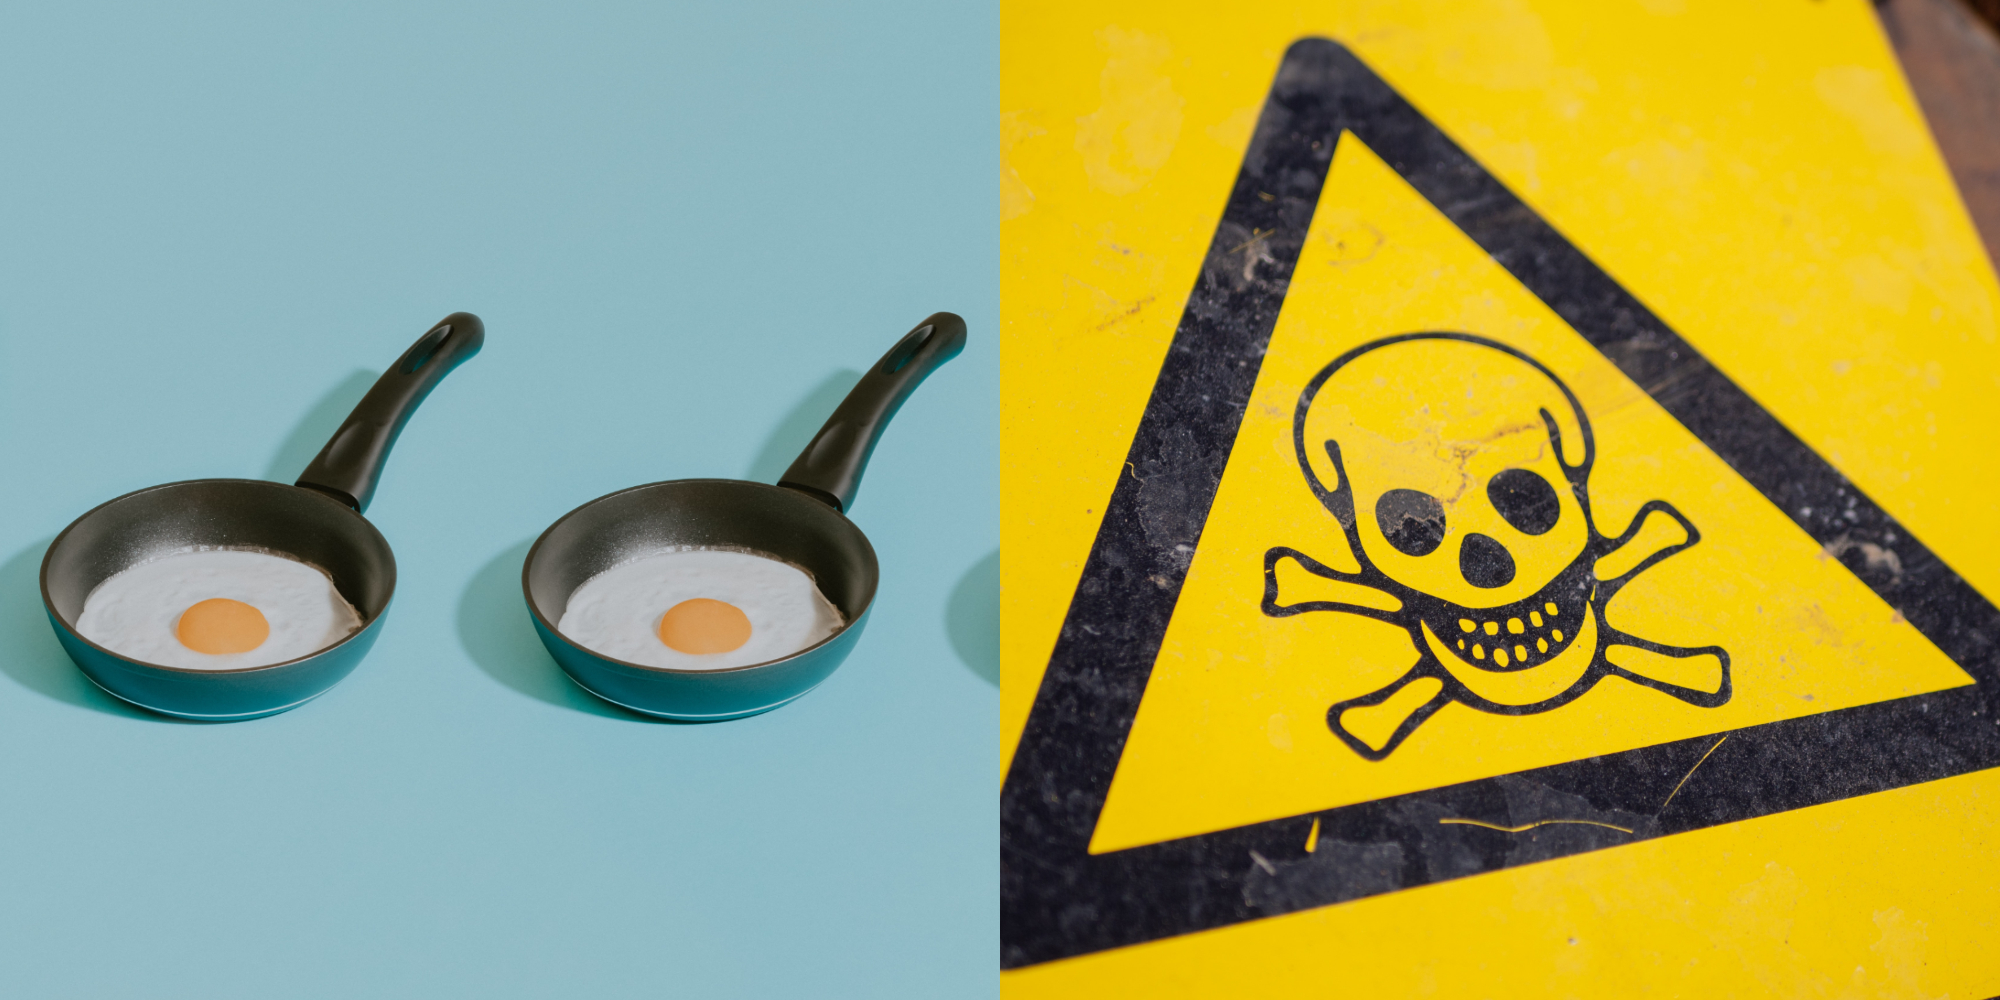 Will the forever chemicals in our cookware be with us forever?